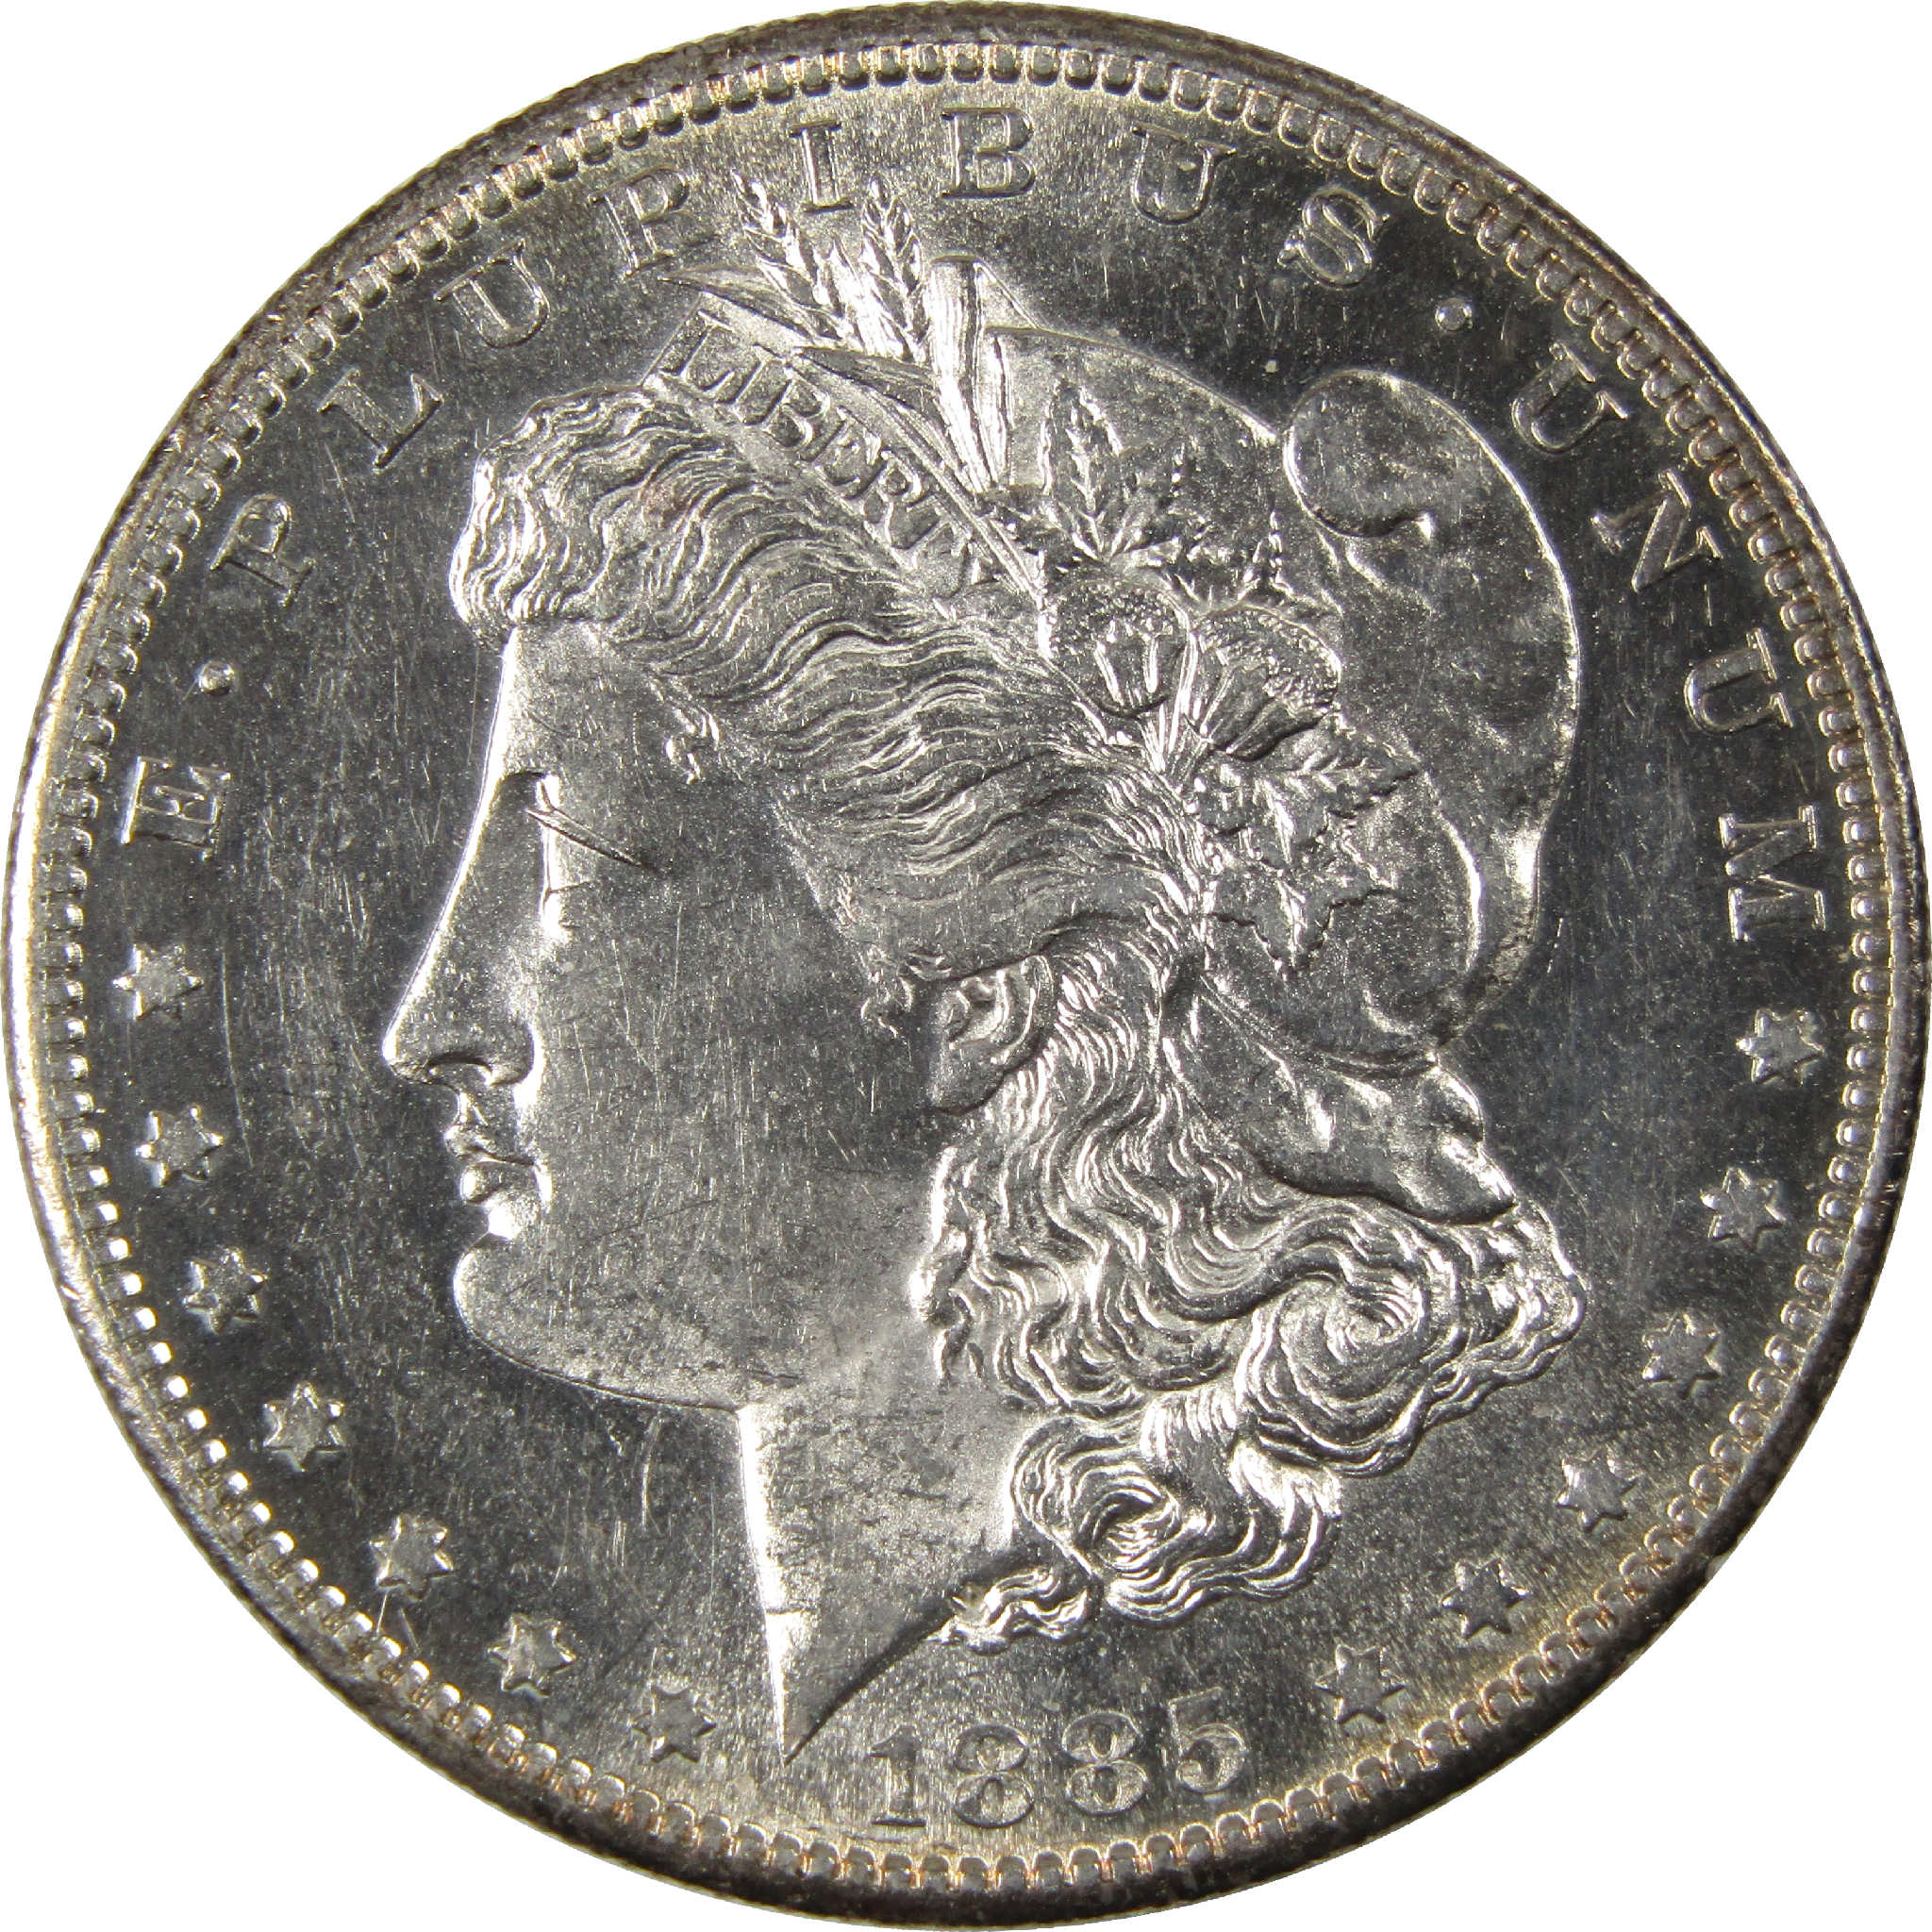 1885 S Morgan Dollar AU About Uncirculated Silver $1 Coin SKU:I11645 - Morgan coin - Morgan silver dollar - Morgan silver dollar for sale - Profile Coins &amp; Collectibles